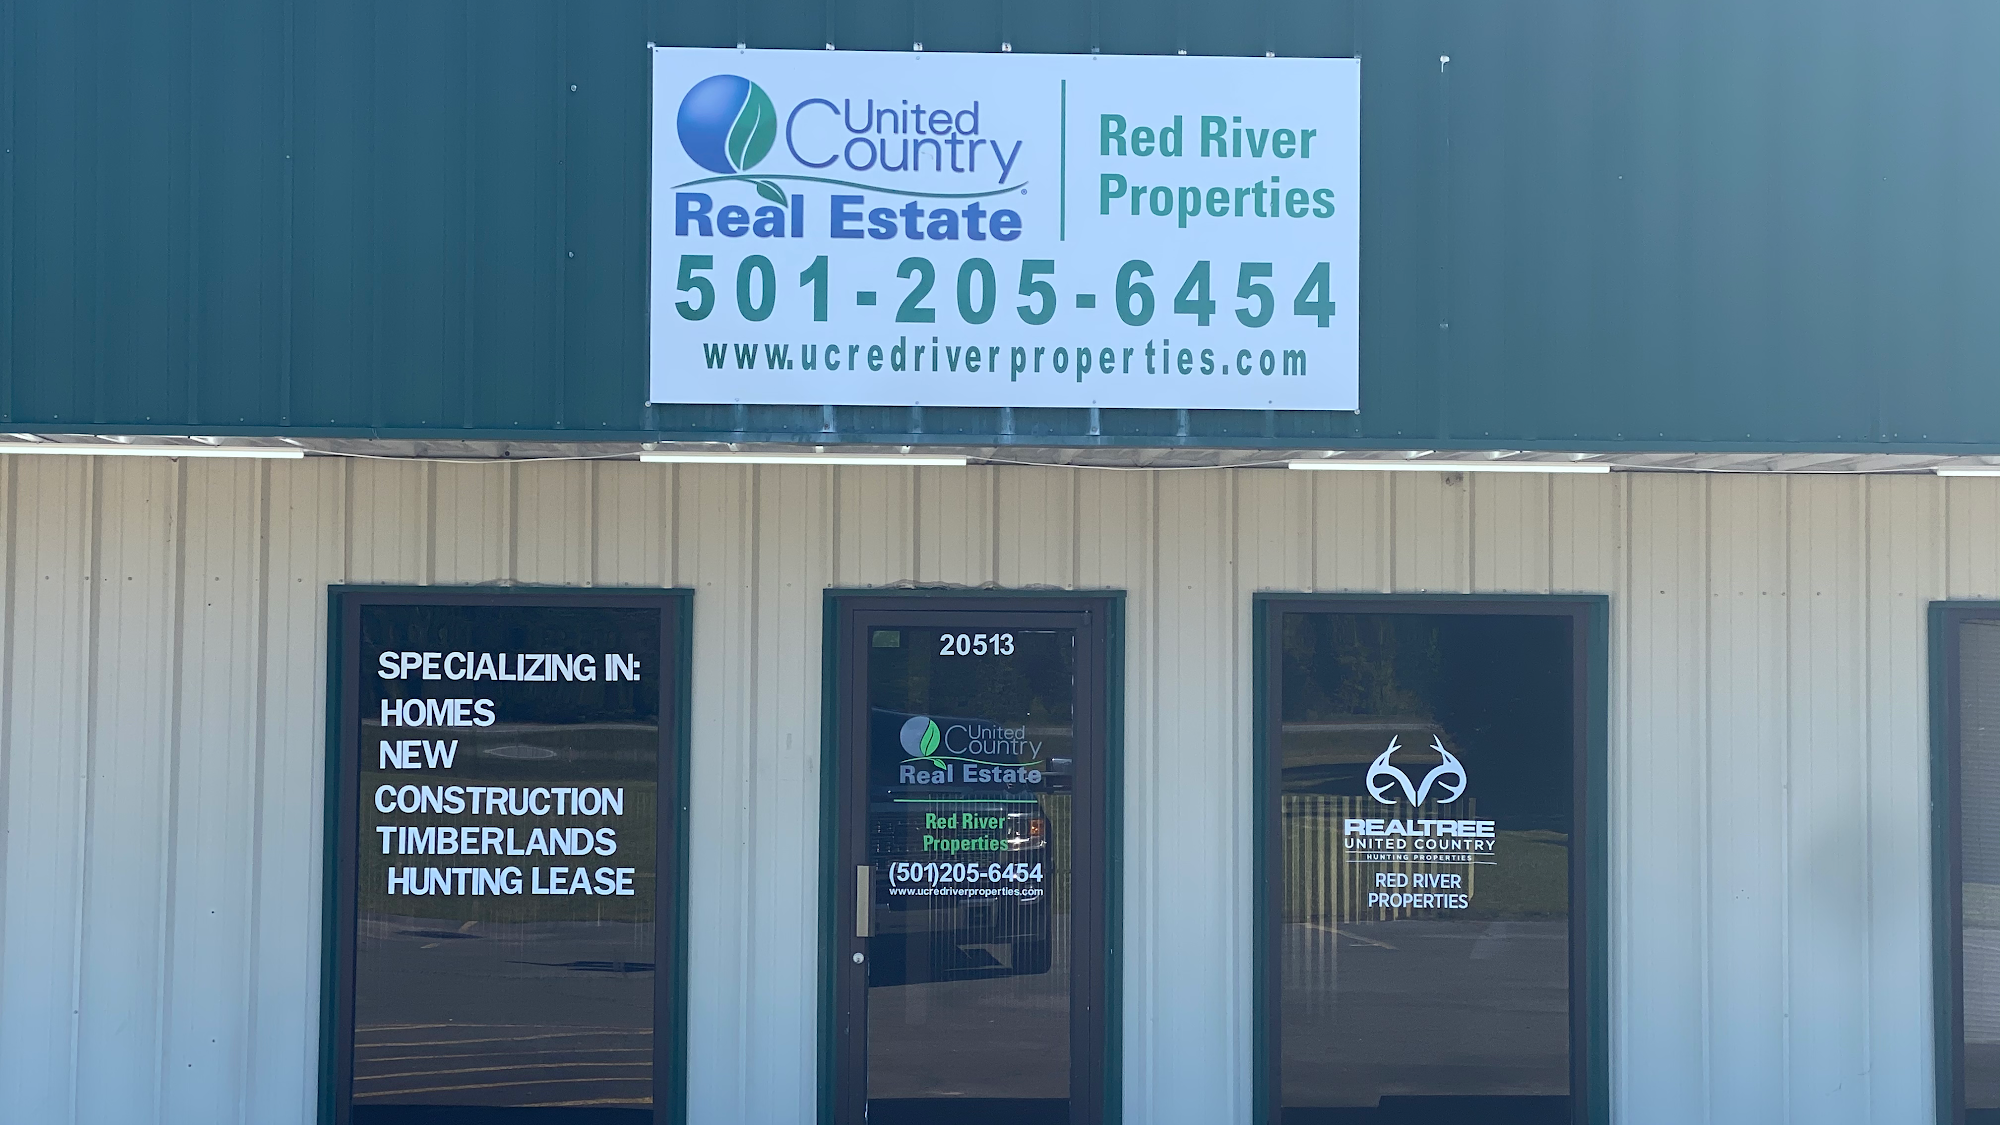 United Country Real Estate - Red River Properties - Arkansas Real Estate Agents 20513 US-167, Hensley Arkansas 72065